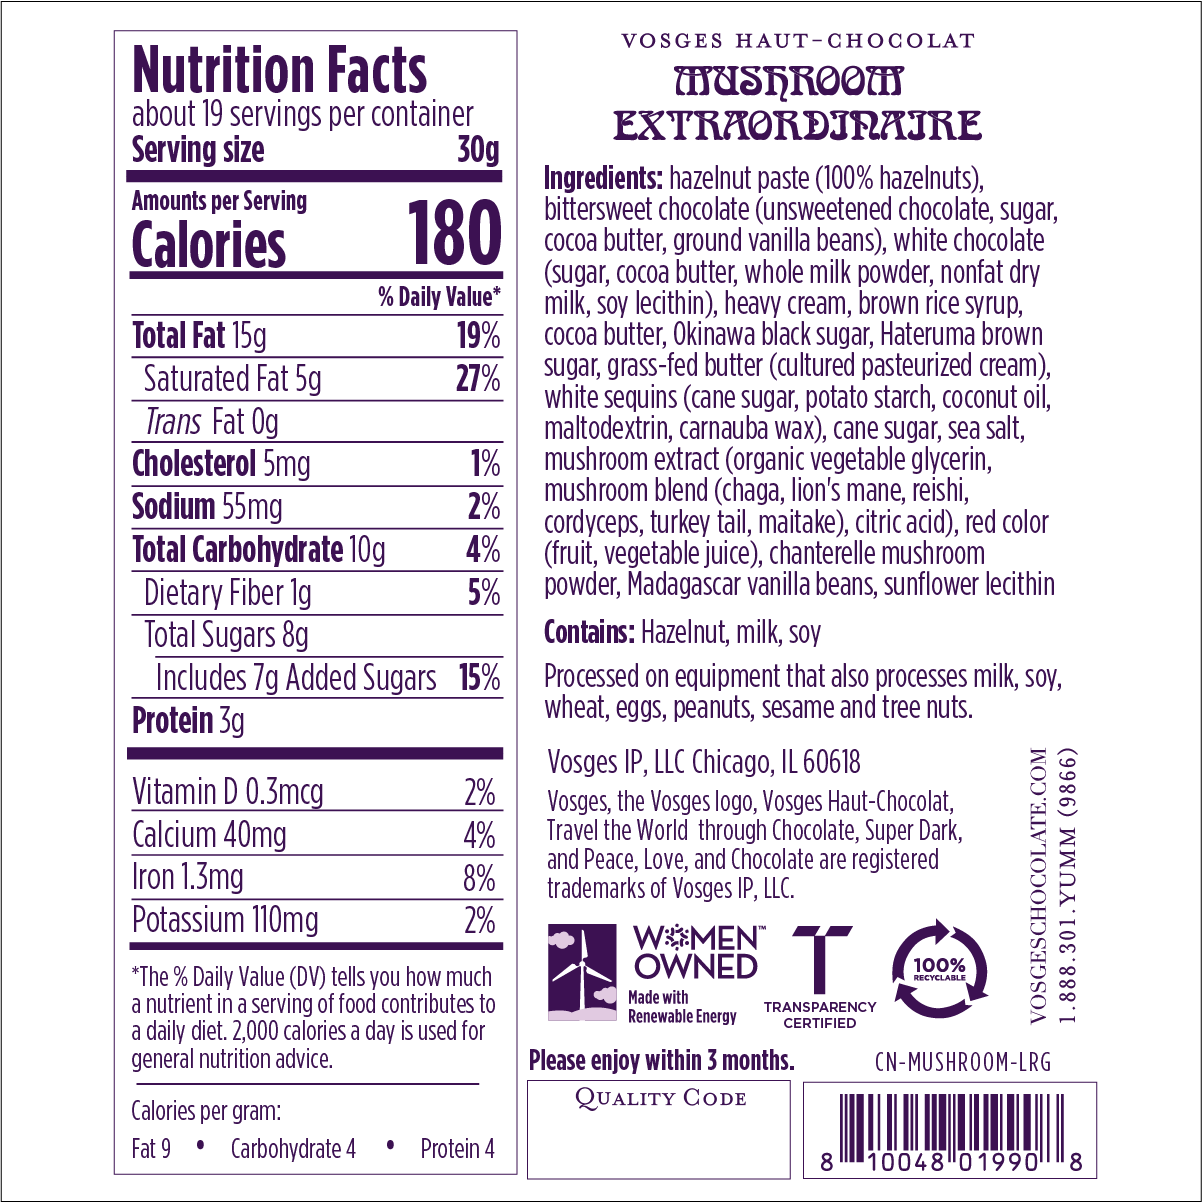 Nutrition Facts and Ingredients of Vosges Haut-Chocolat Enchanted Mushroom Extraordinaire in purple, san-serif font on a white background.